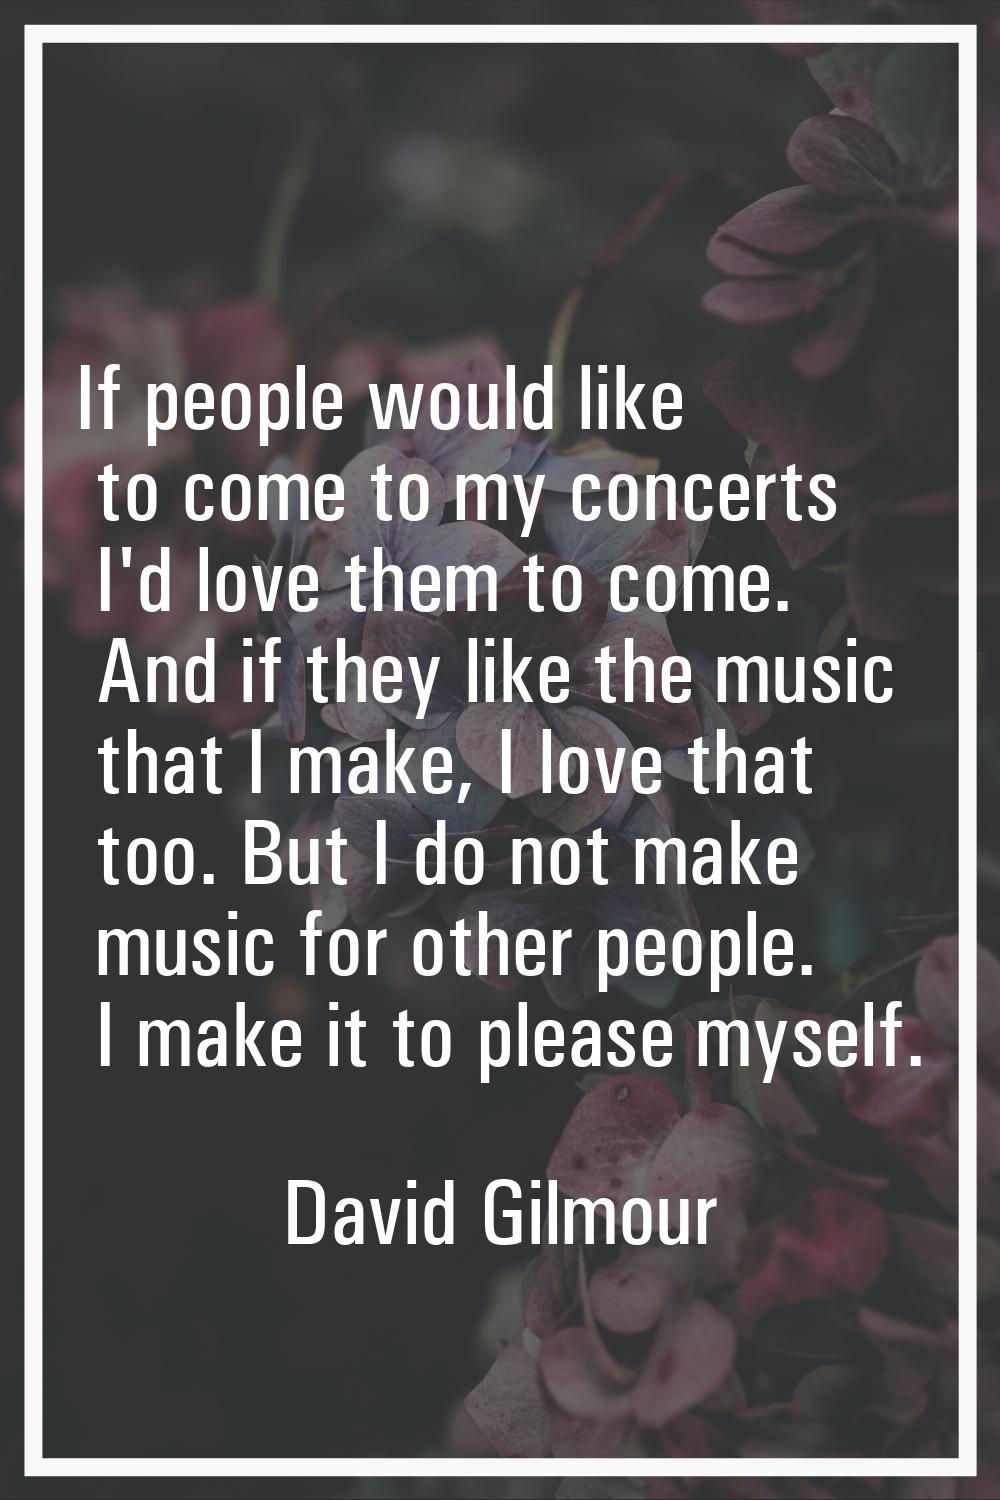 If people would like to come to my concerts I'd love them to come. And if they like the music that 